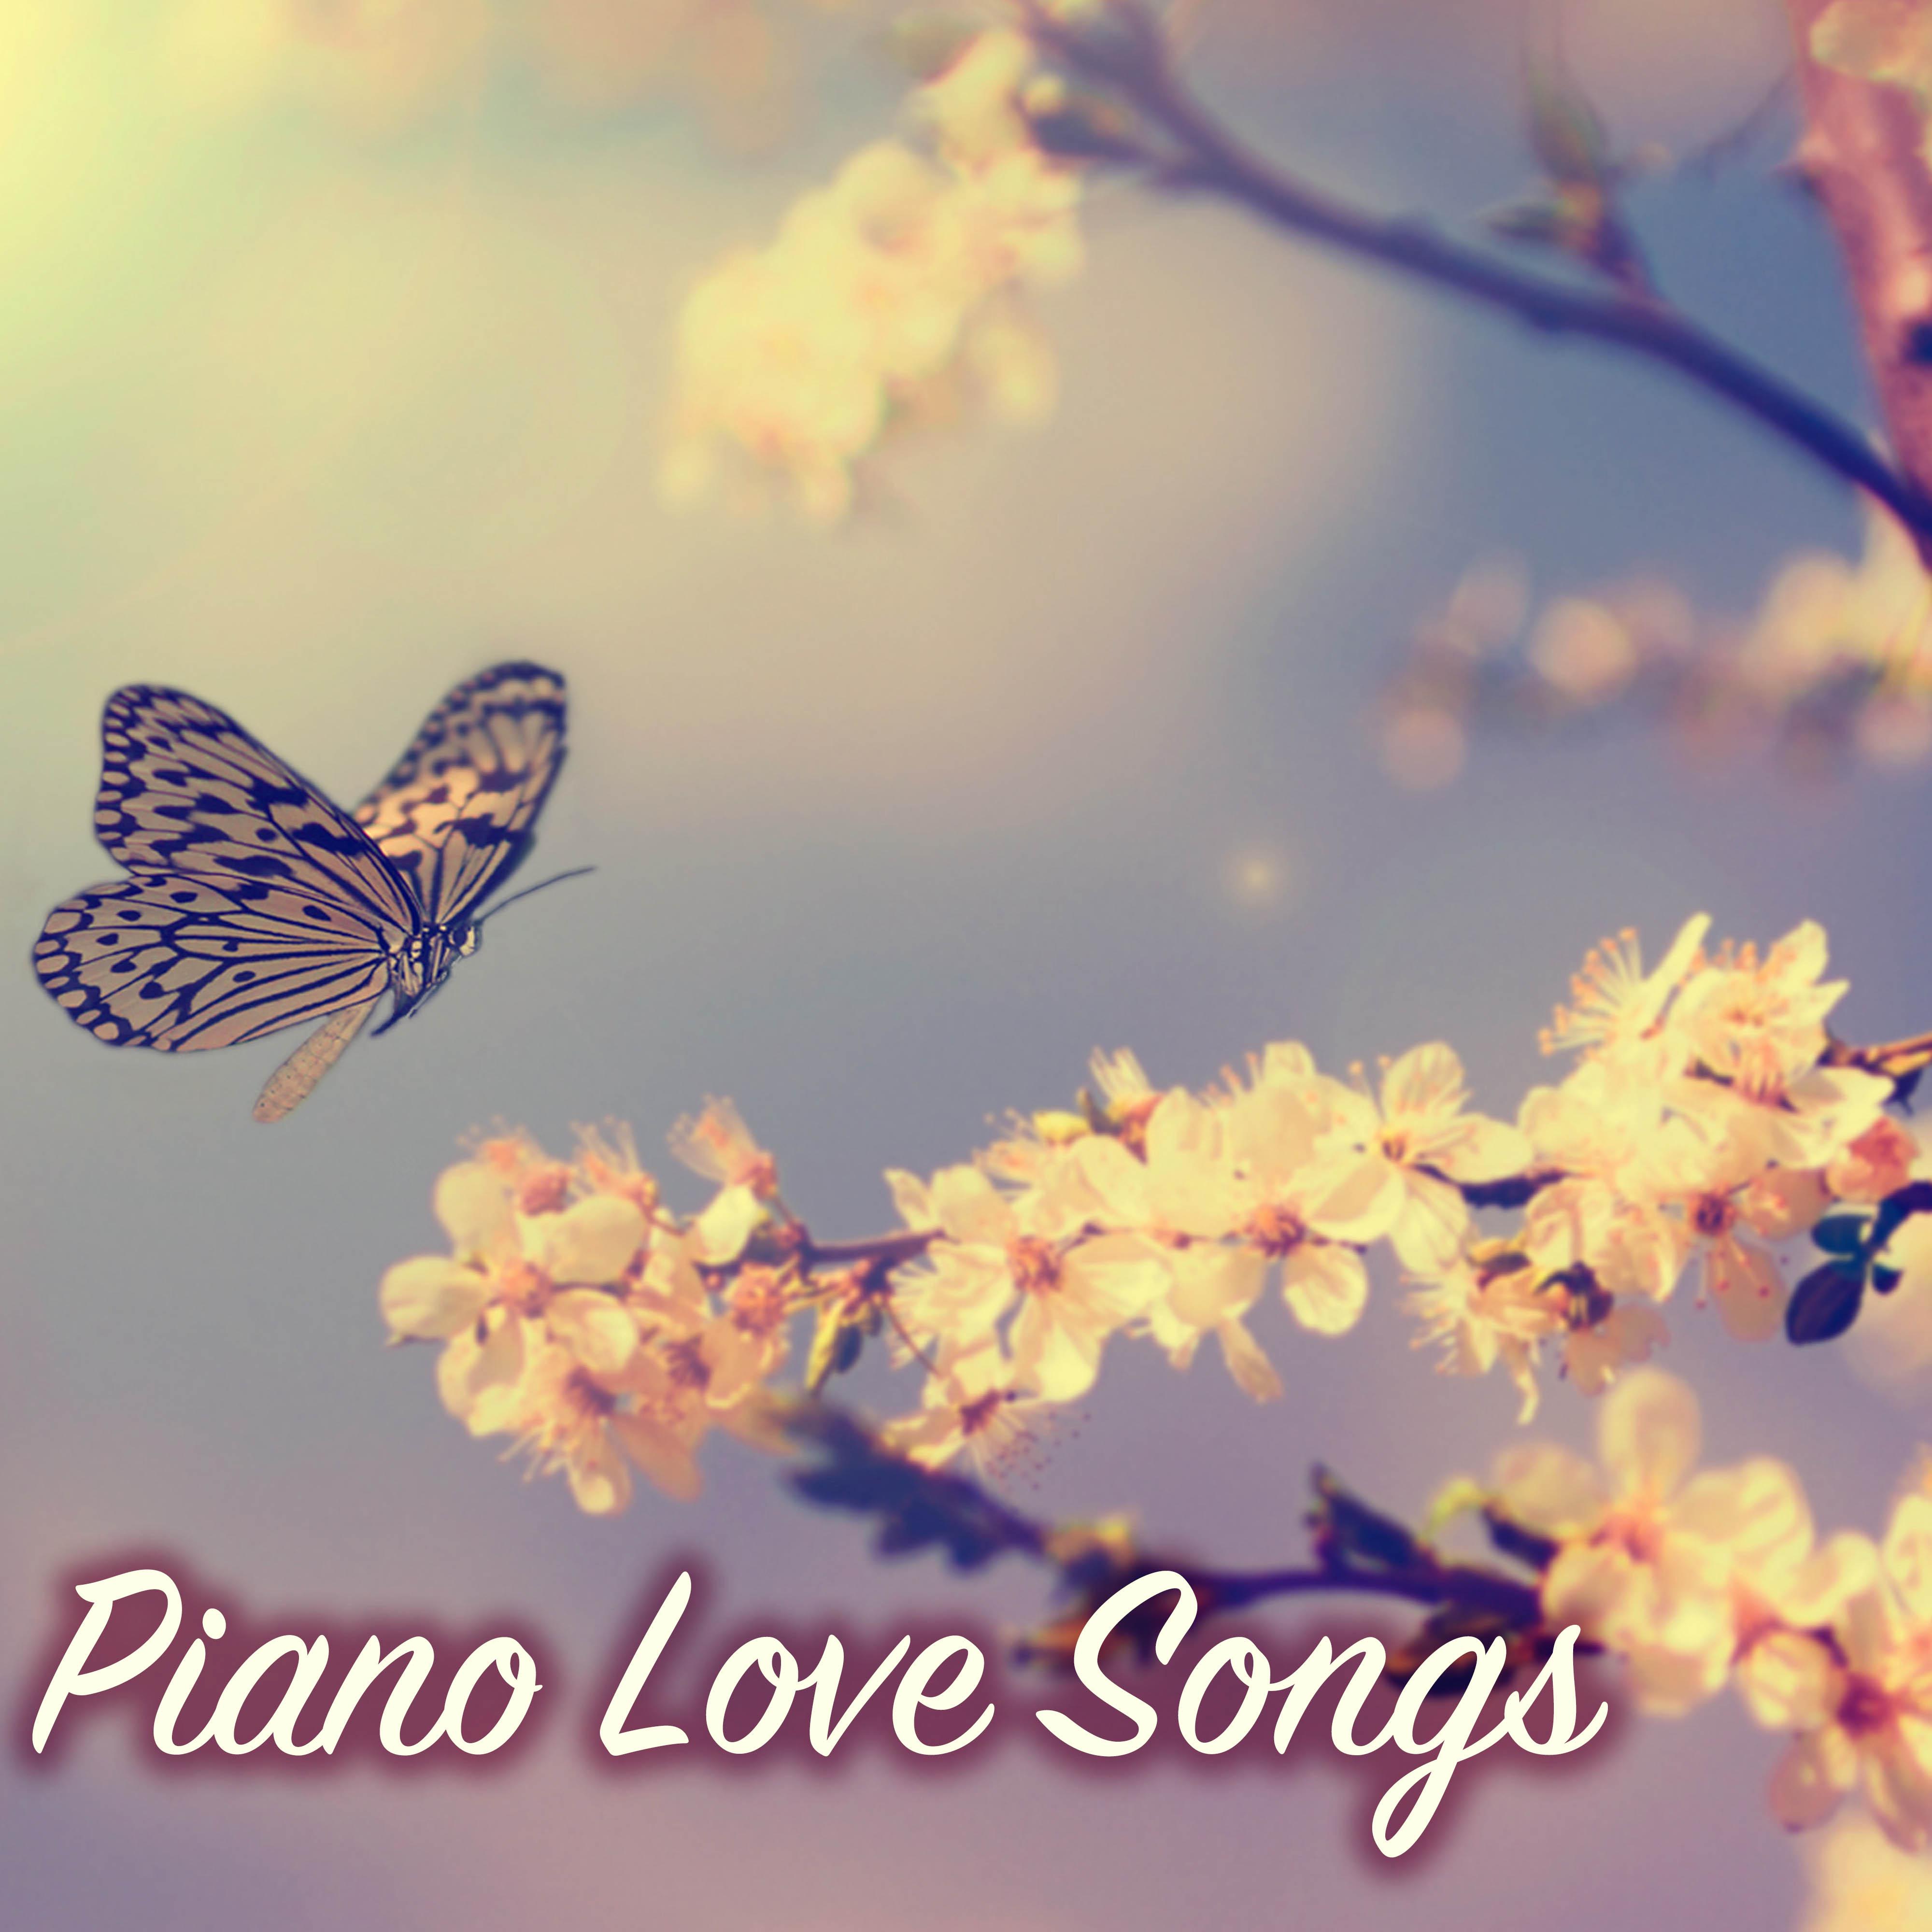 Piano Love Songs - Romantic Instrumental Music for Love, Passionate Valentines Day Classics